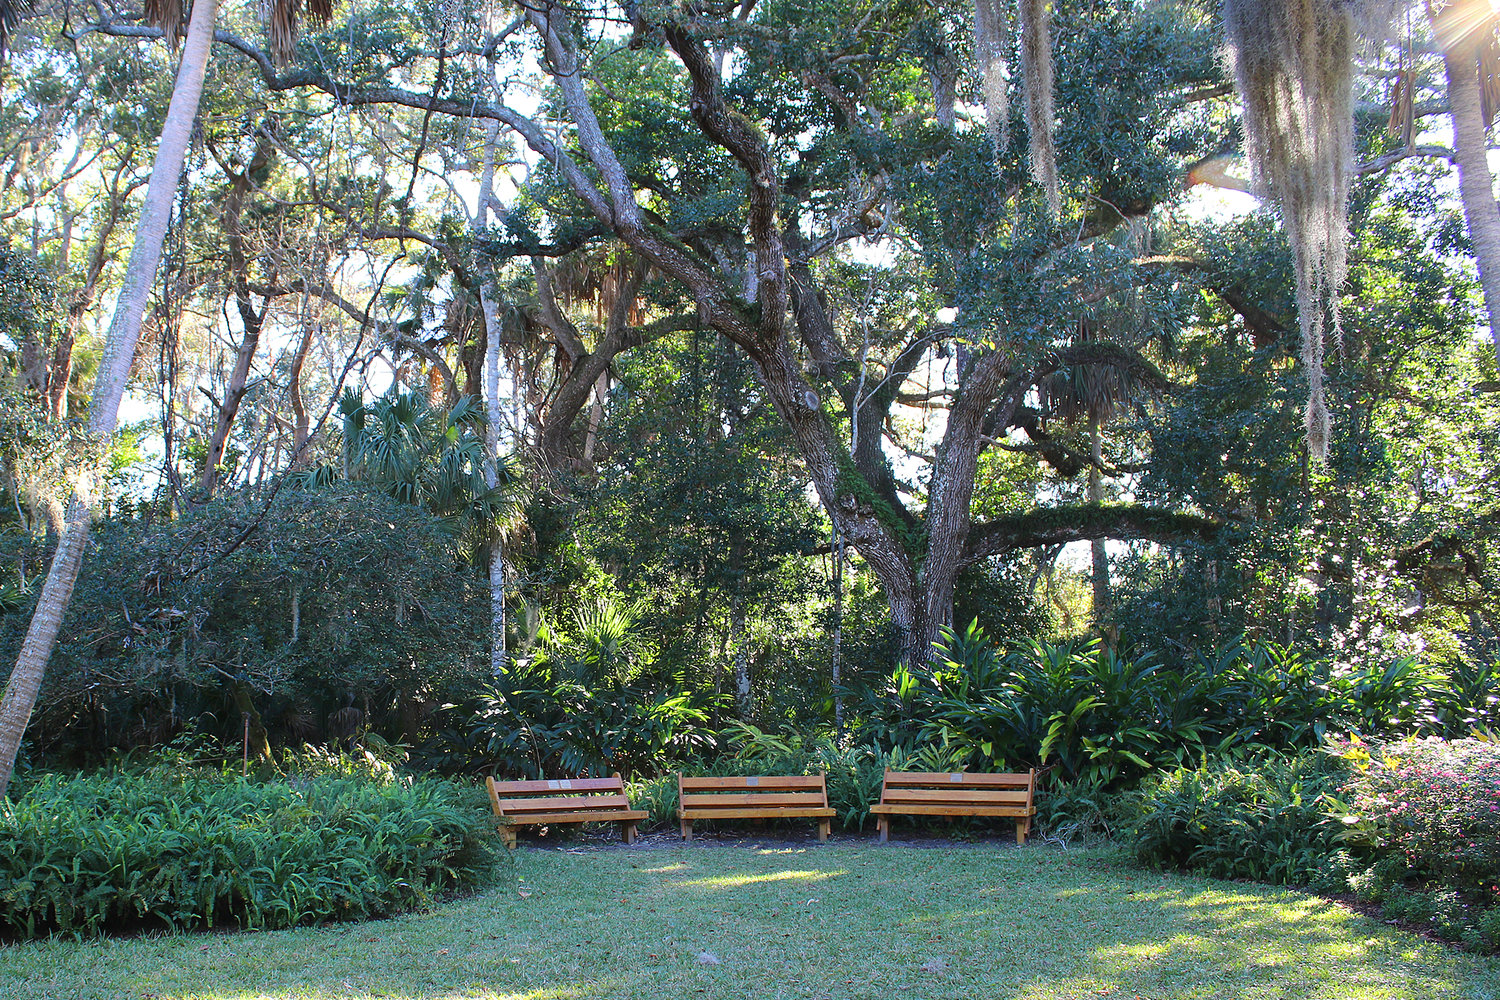 Romance Is In The Air At Washington Oaks Gardens State Park The